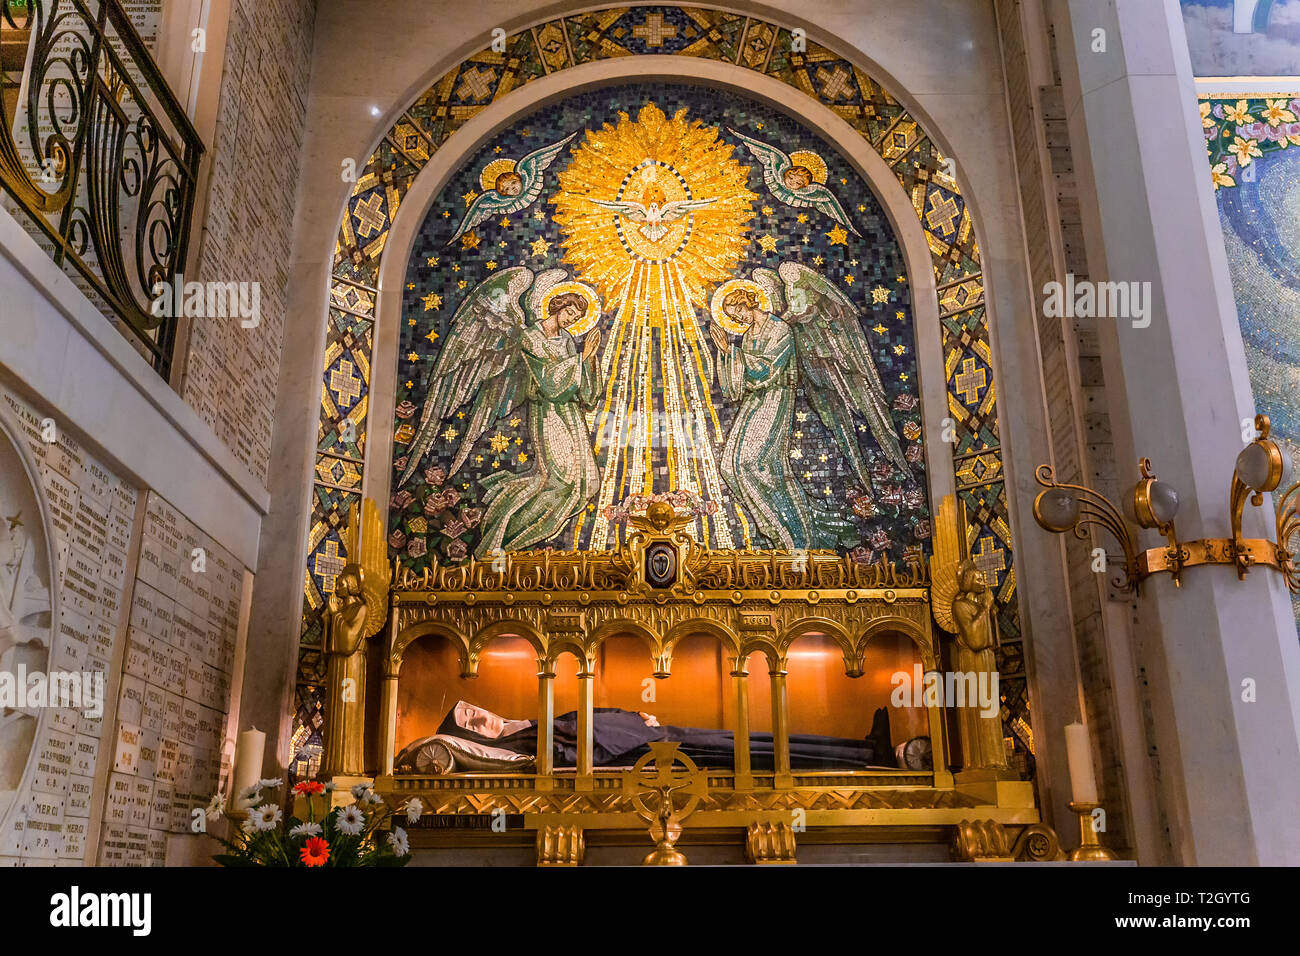 PARIS, FRANCE, SEPTEMBER 08, 2016 : interiors and details of Chapel of Our Lady of the Miraculous Medal, september 08, 2016, in Paris, France Stock Photo